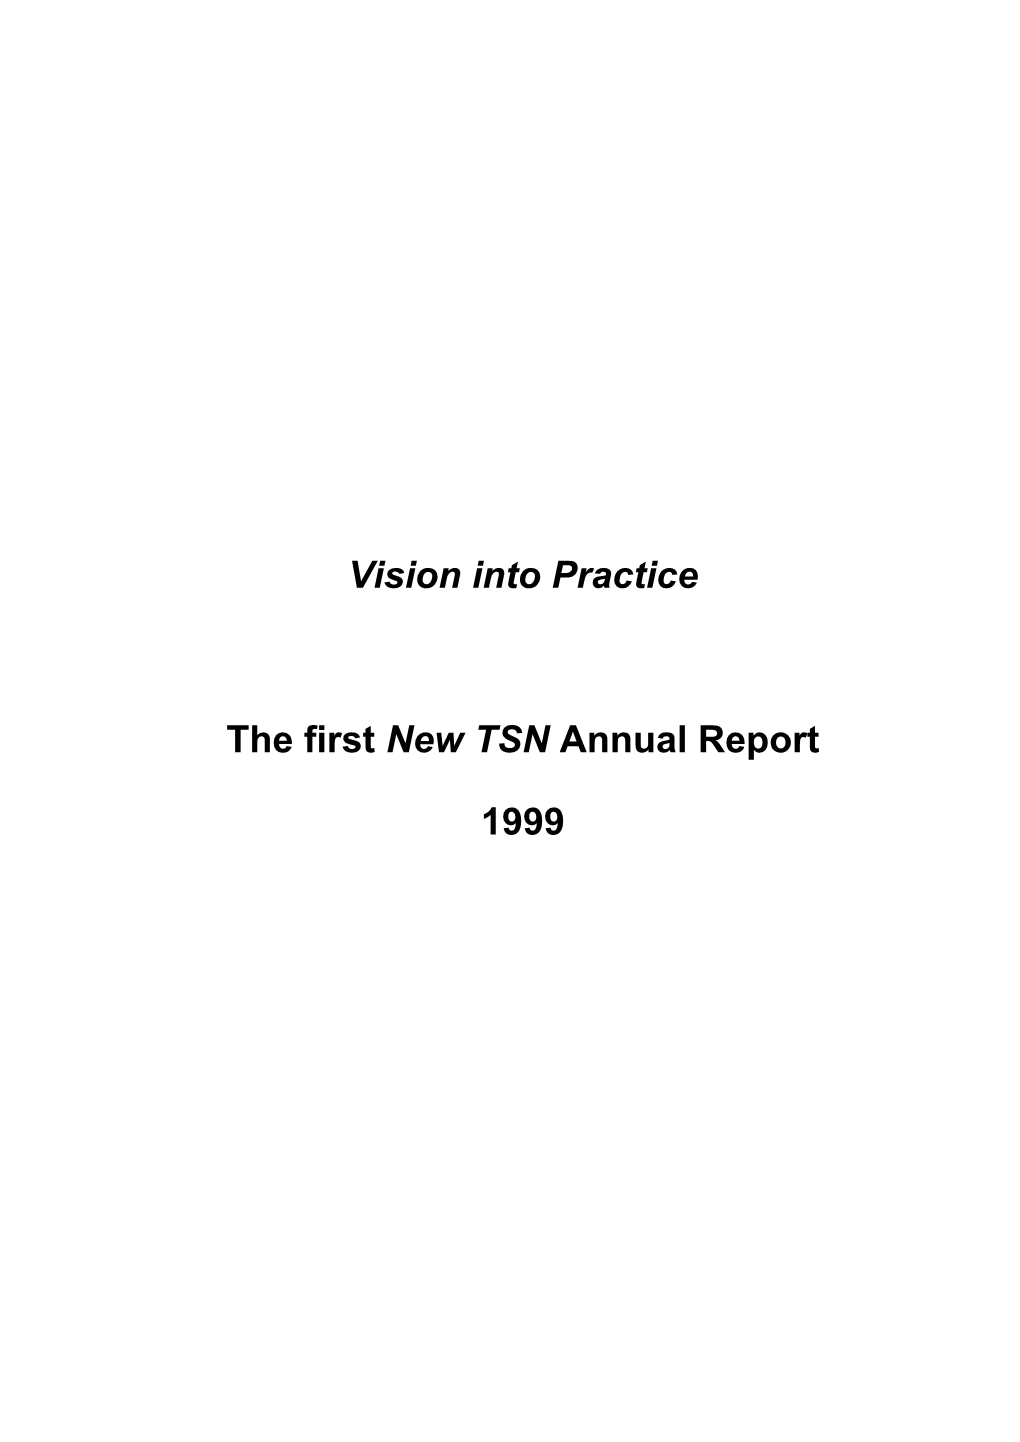 Vision Into Practice the First New TSN Annual Report 1999